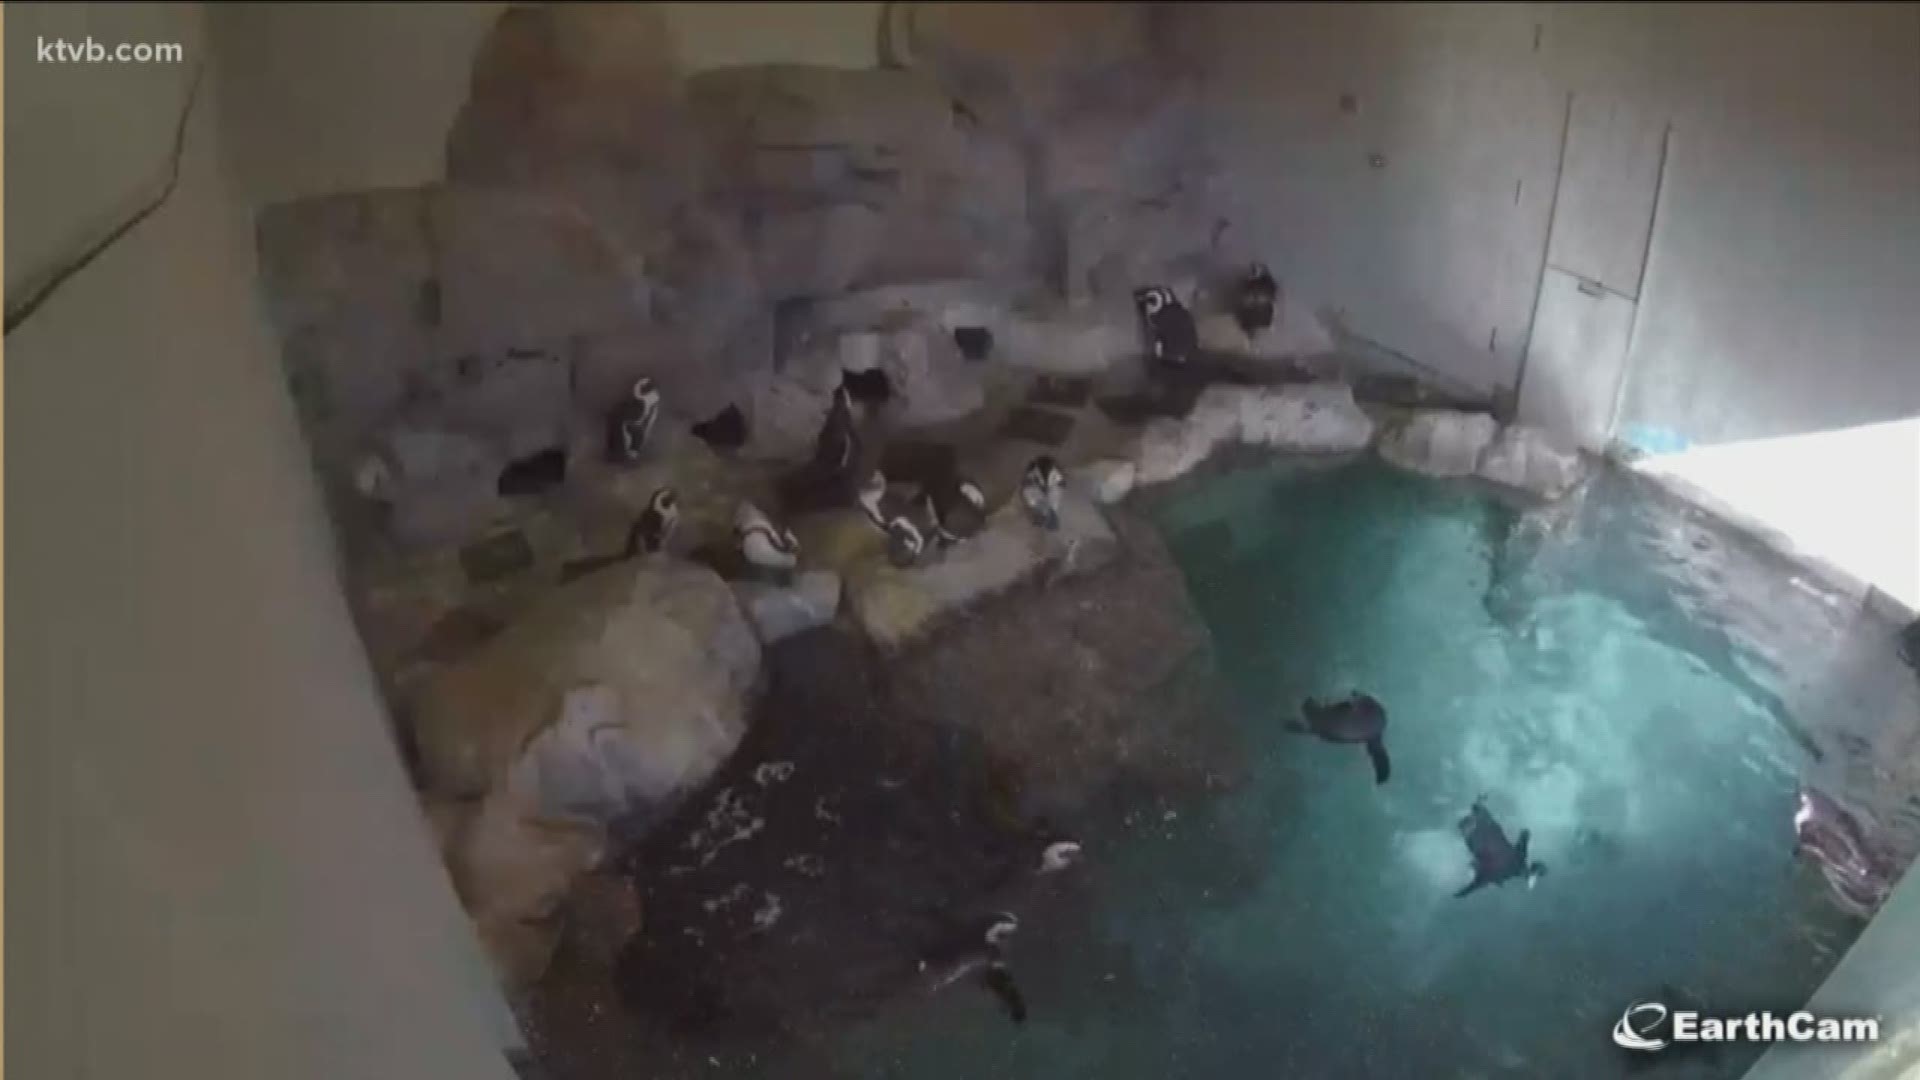 Earthcam is providing live streaming of the penguin cove at the Idaho Falls Zoo.